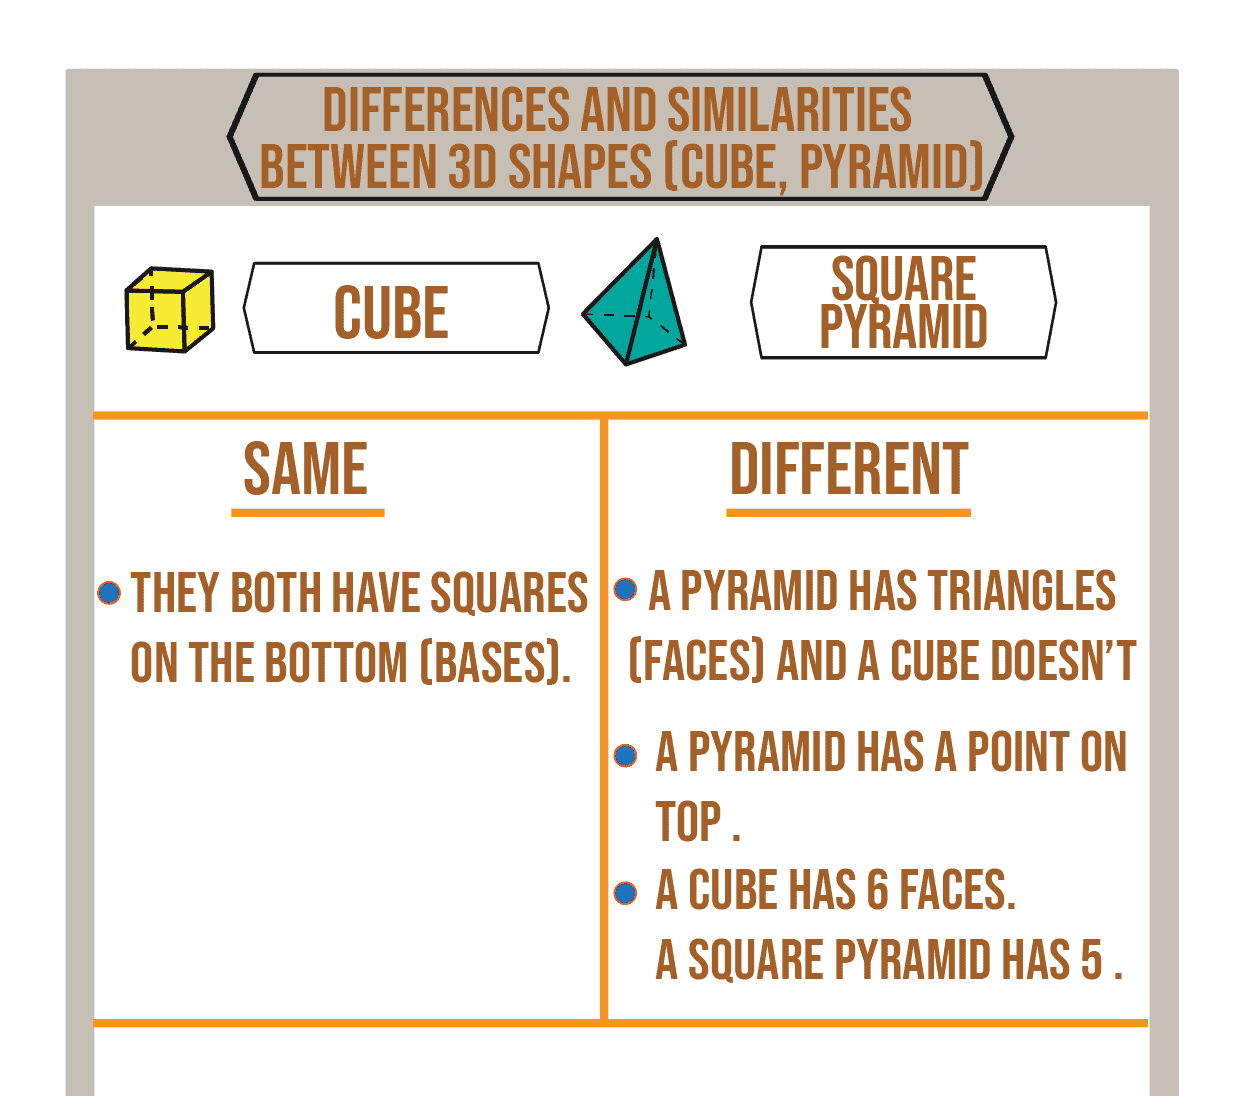 Differences and Similarities between 3D Shapes of cube and pyramid